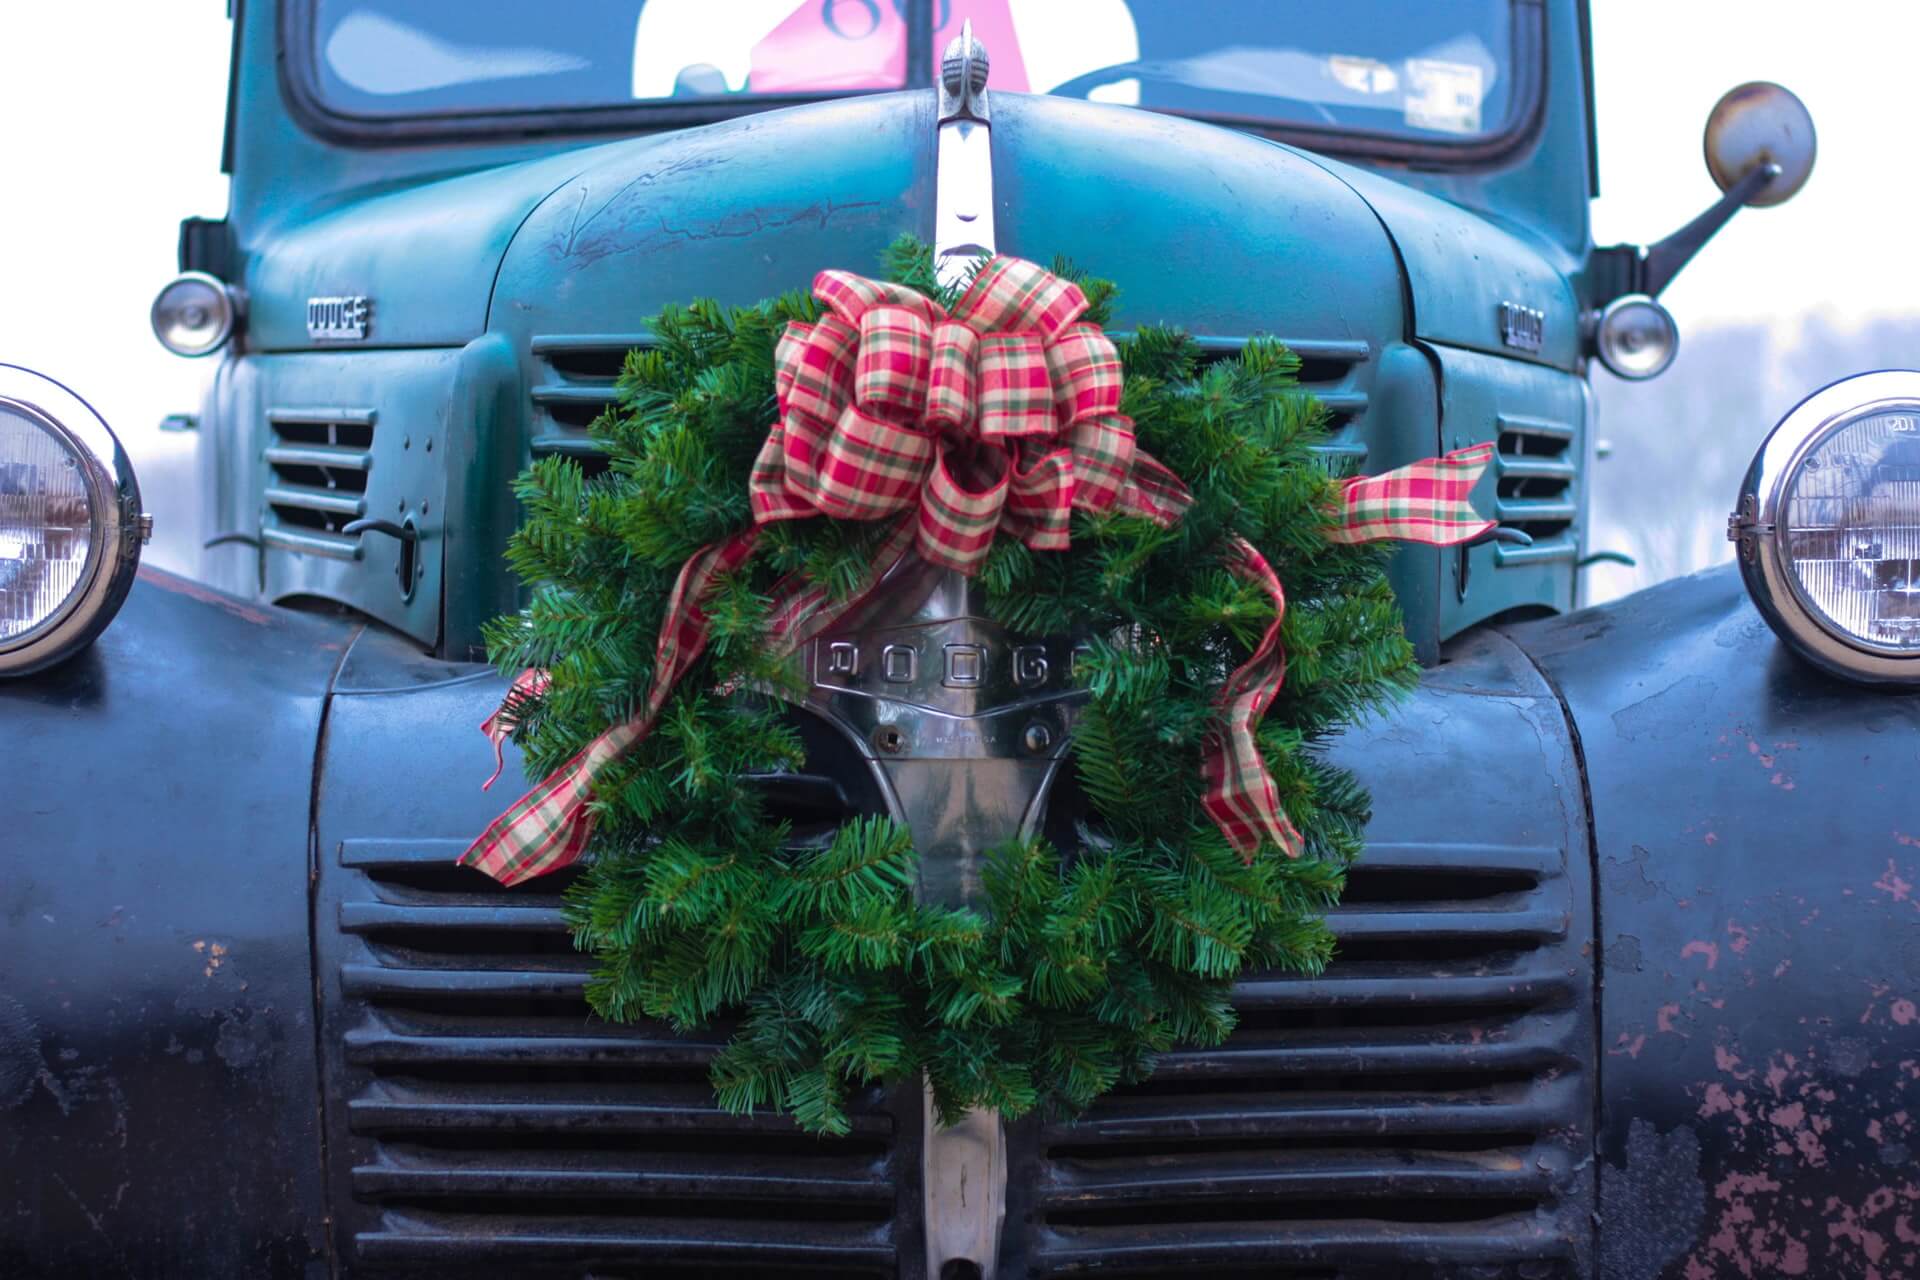 Classic vintage Dodge pickup truck with winter wreath on grille